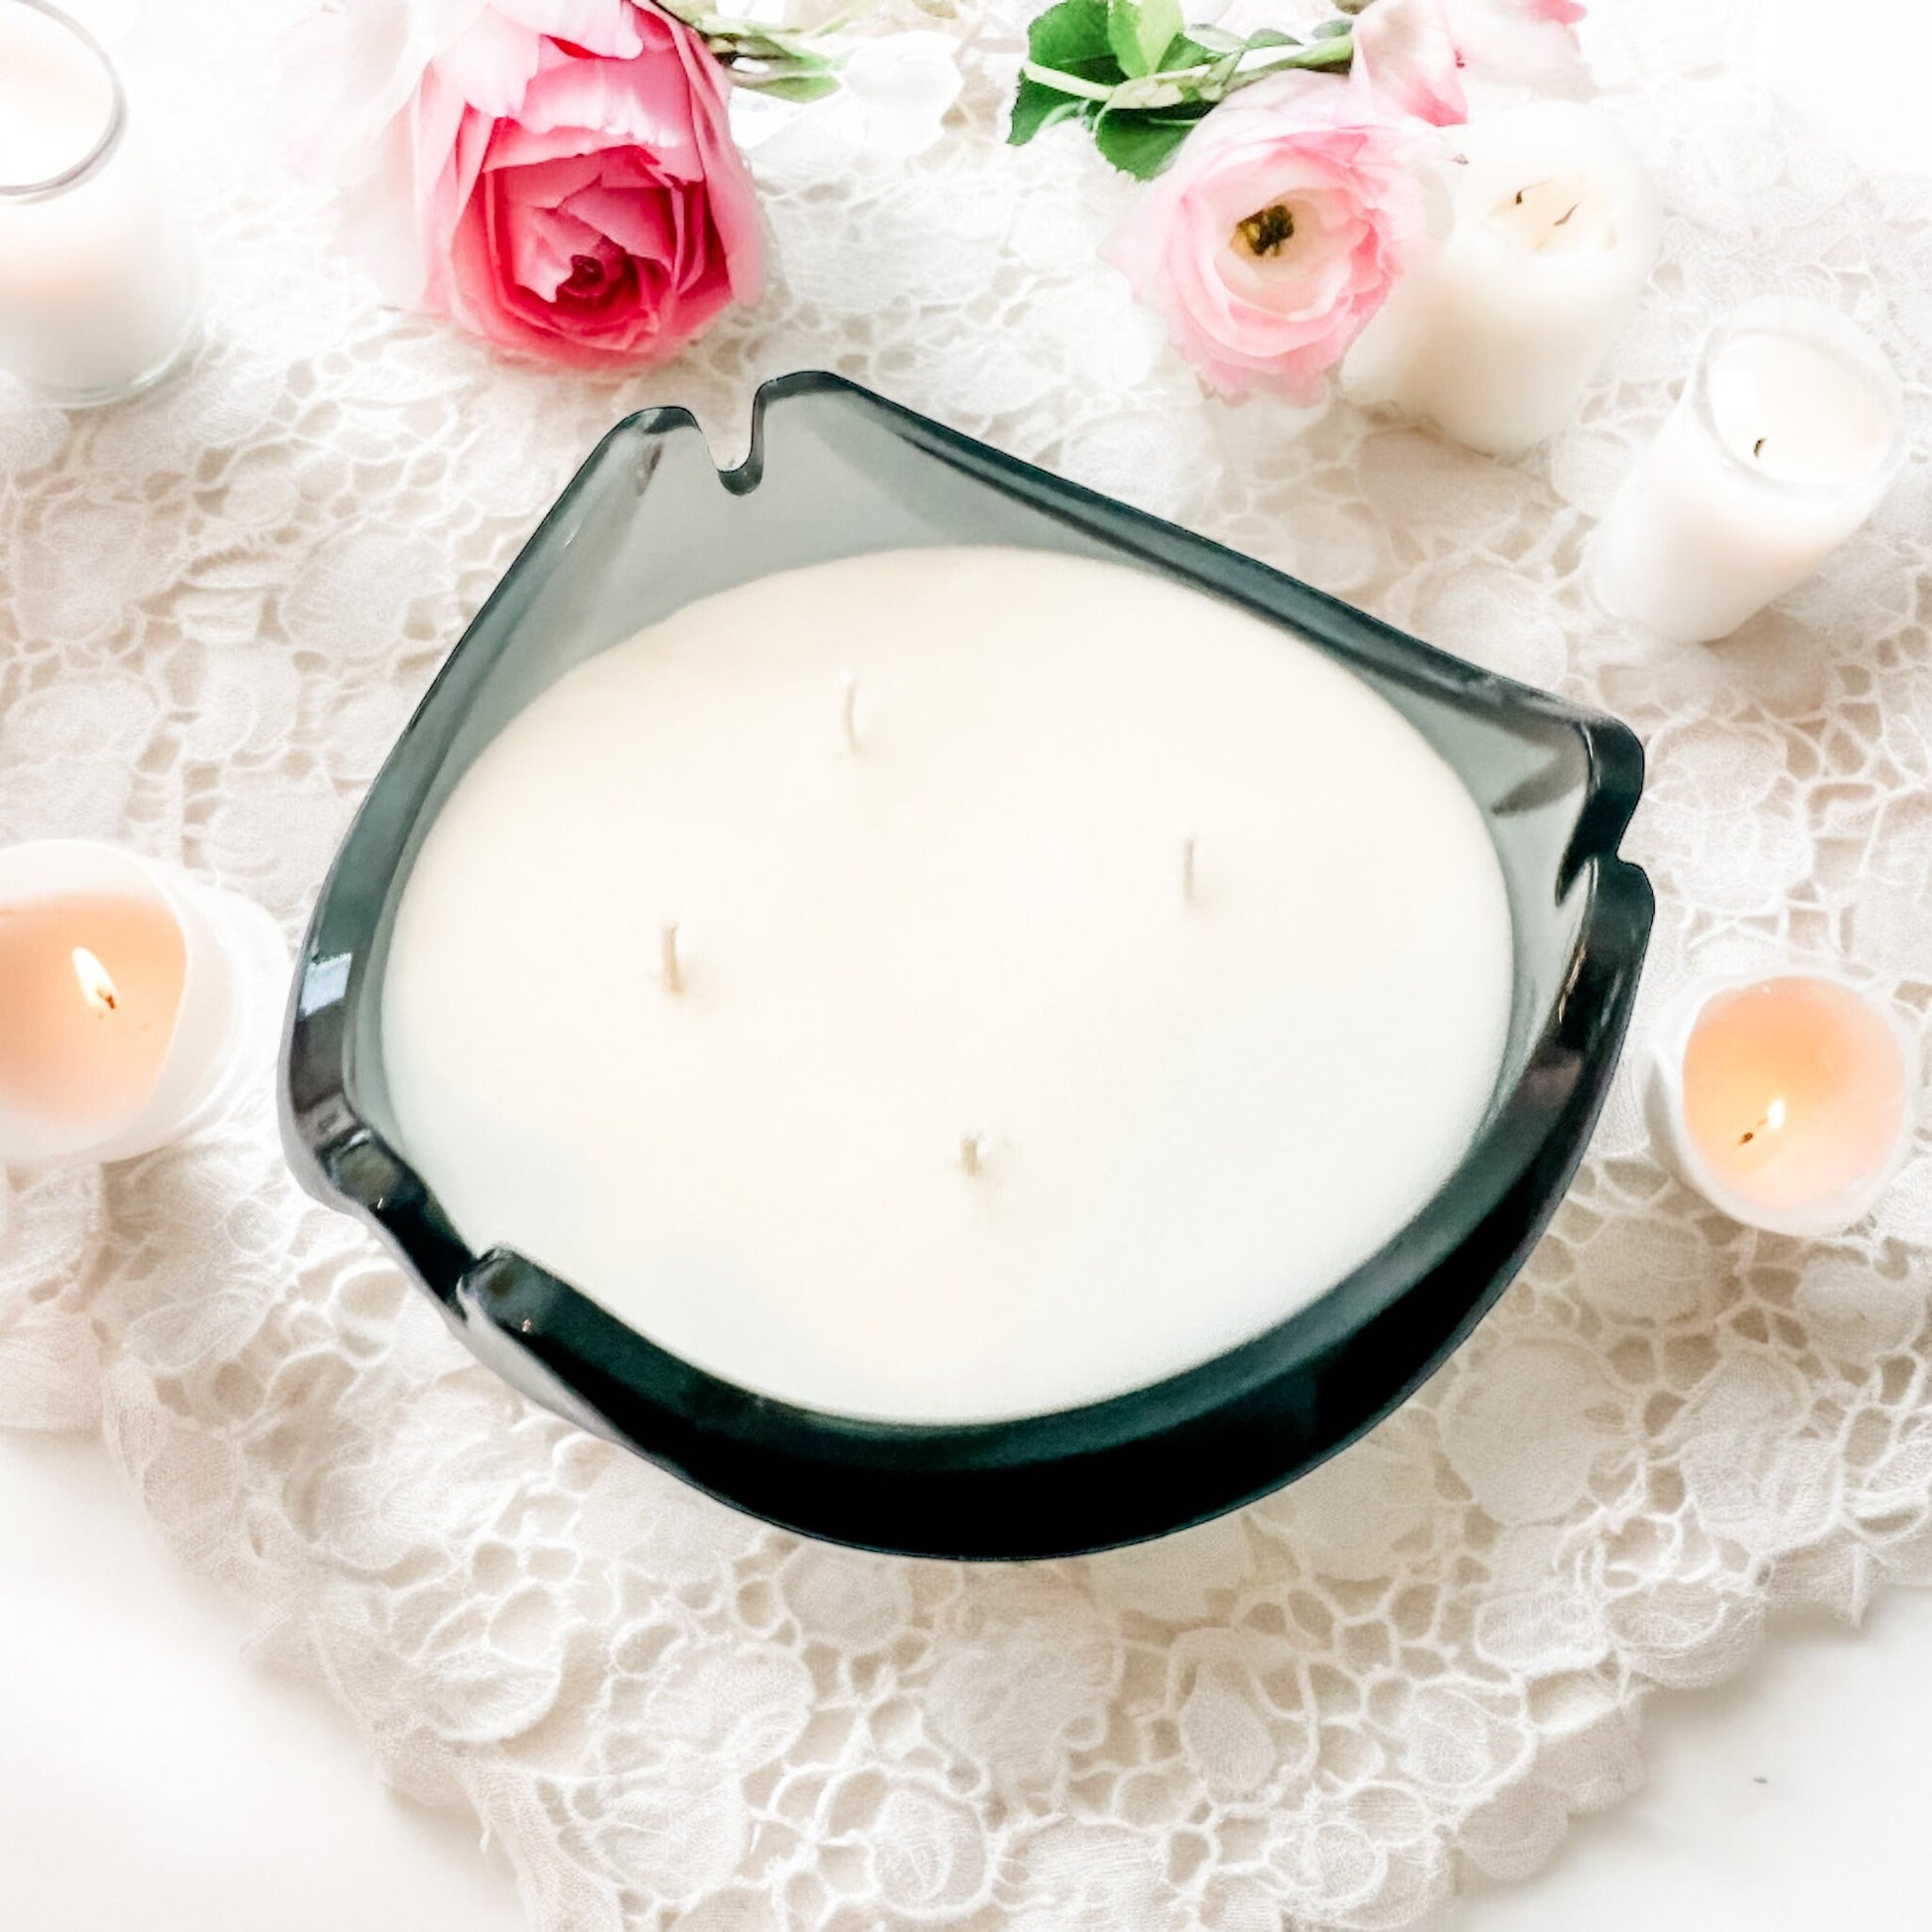 Scented Candles, Vintage Ashtray, Mothers Day Gift from Son, Mom Gift